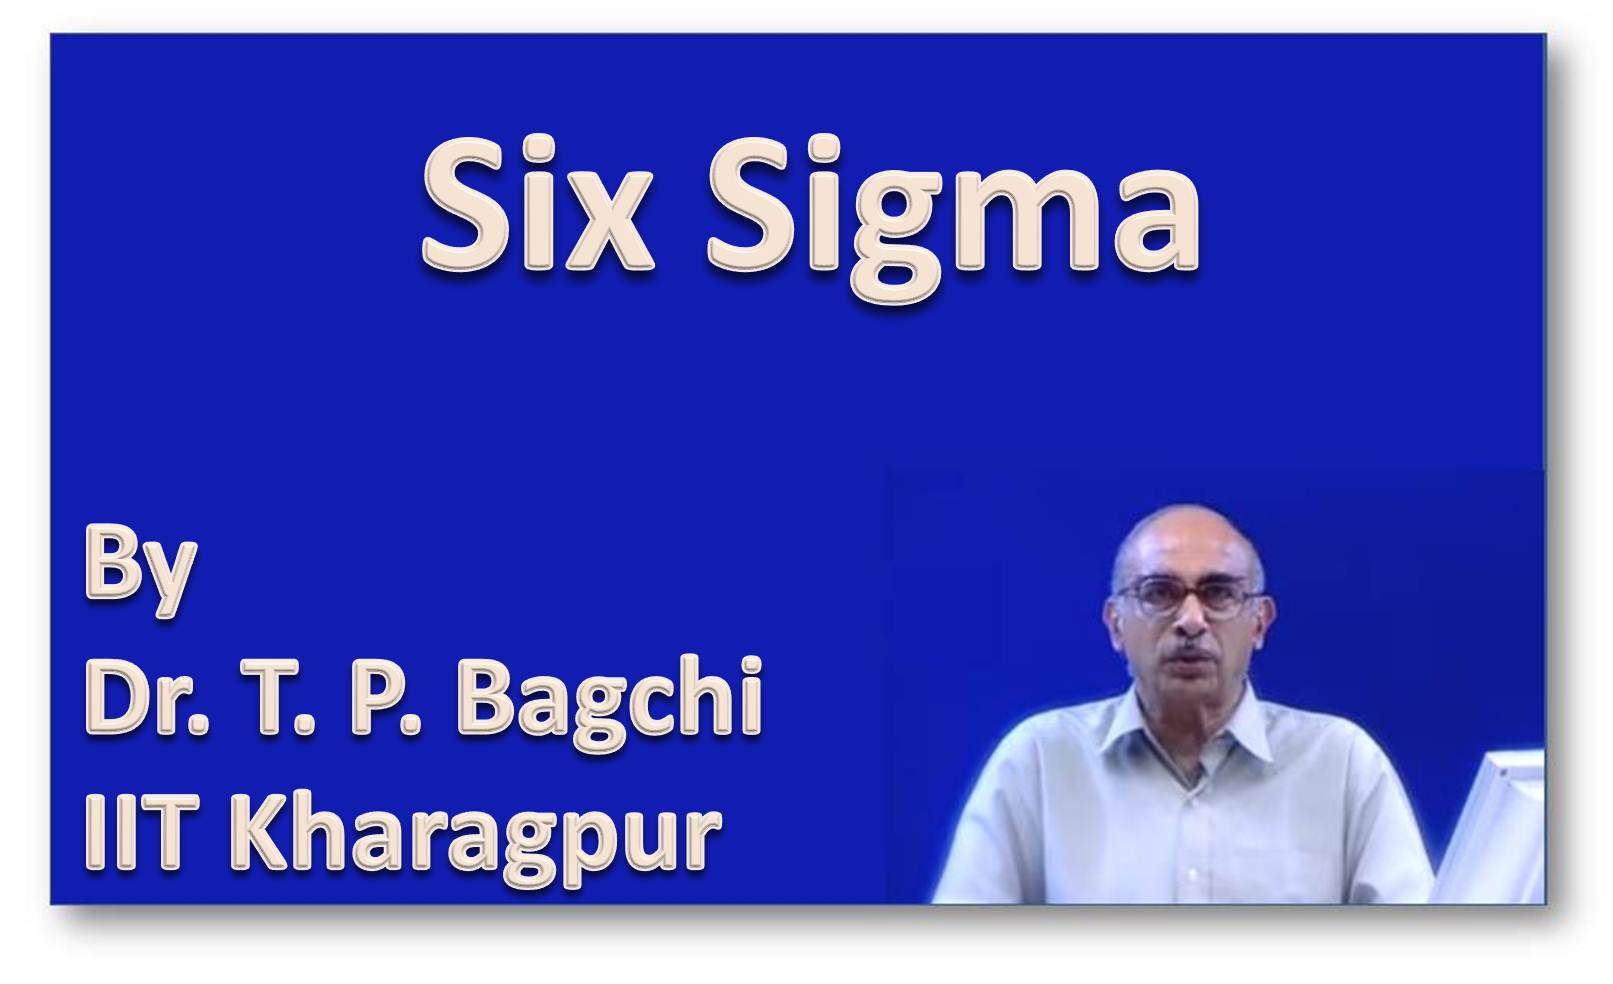 http://study.aisectonline.com/images/SubCategory/Video Lecture Series on Six Sigma by Dr. T. P. Bagchi, IIT Kharagpur.jpg